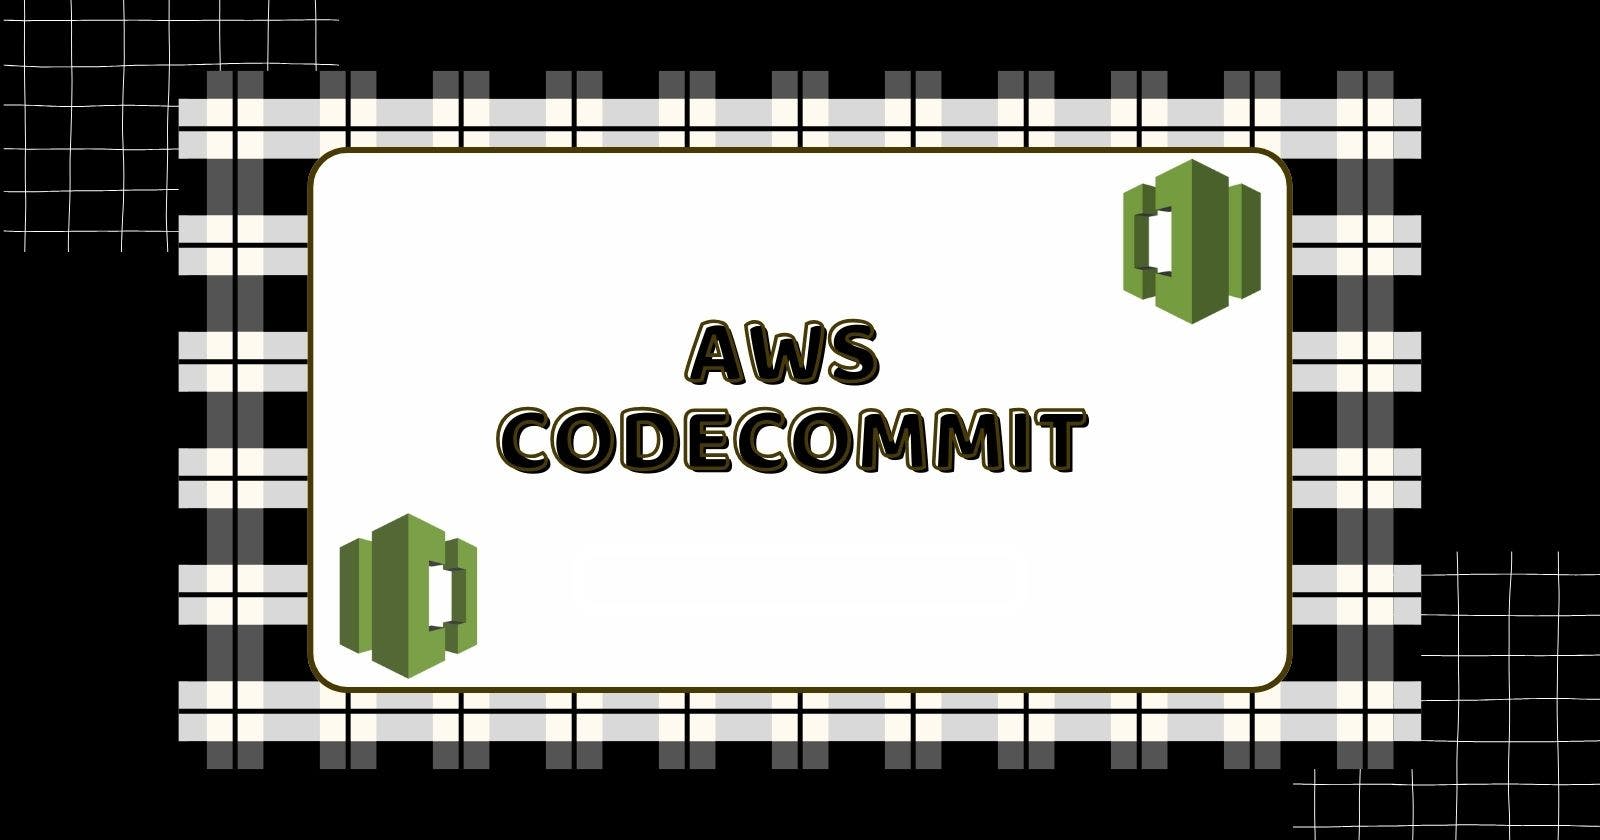 AWS CodeCommit: Hands-On AWS Lab